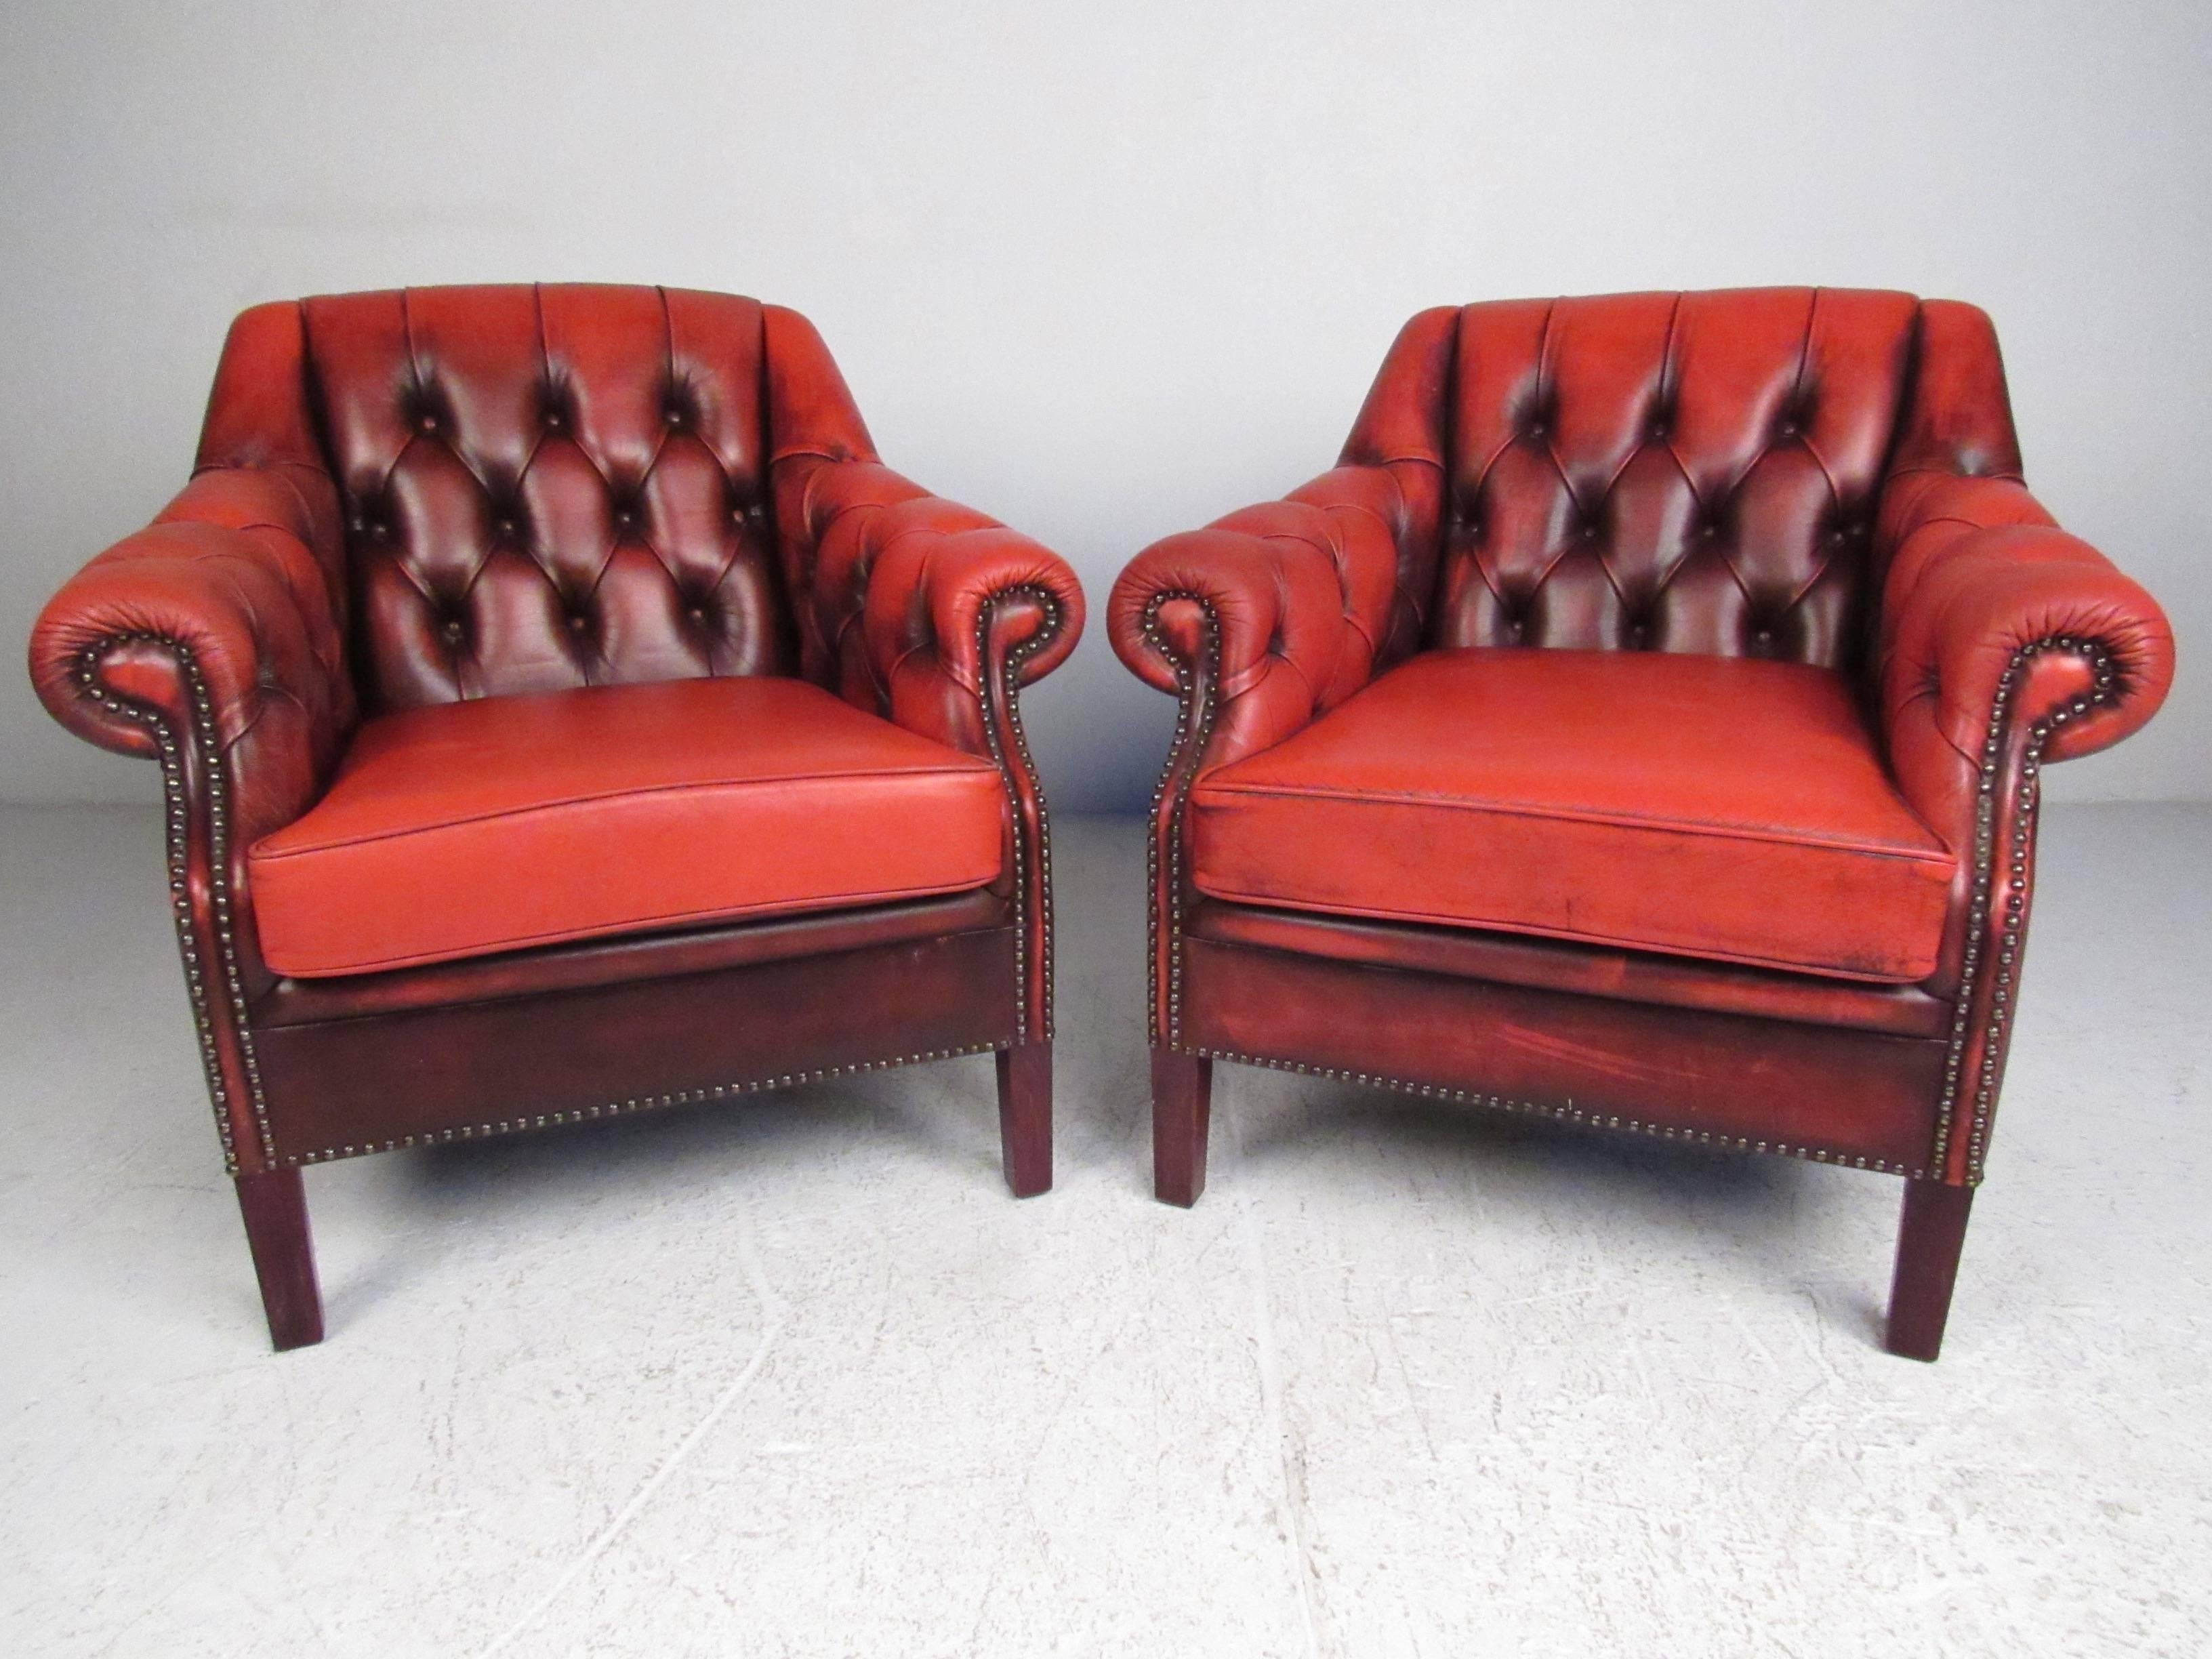 This unique three-piece Chesterfield living room set includes a stylish red leather sofa and pair of matching armchairs. Rich patinated leather is complimented by deep tufts, upholstery buttons, and scrolled arms, while tapered hardwood legs provide